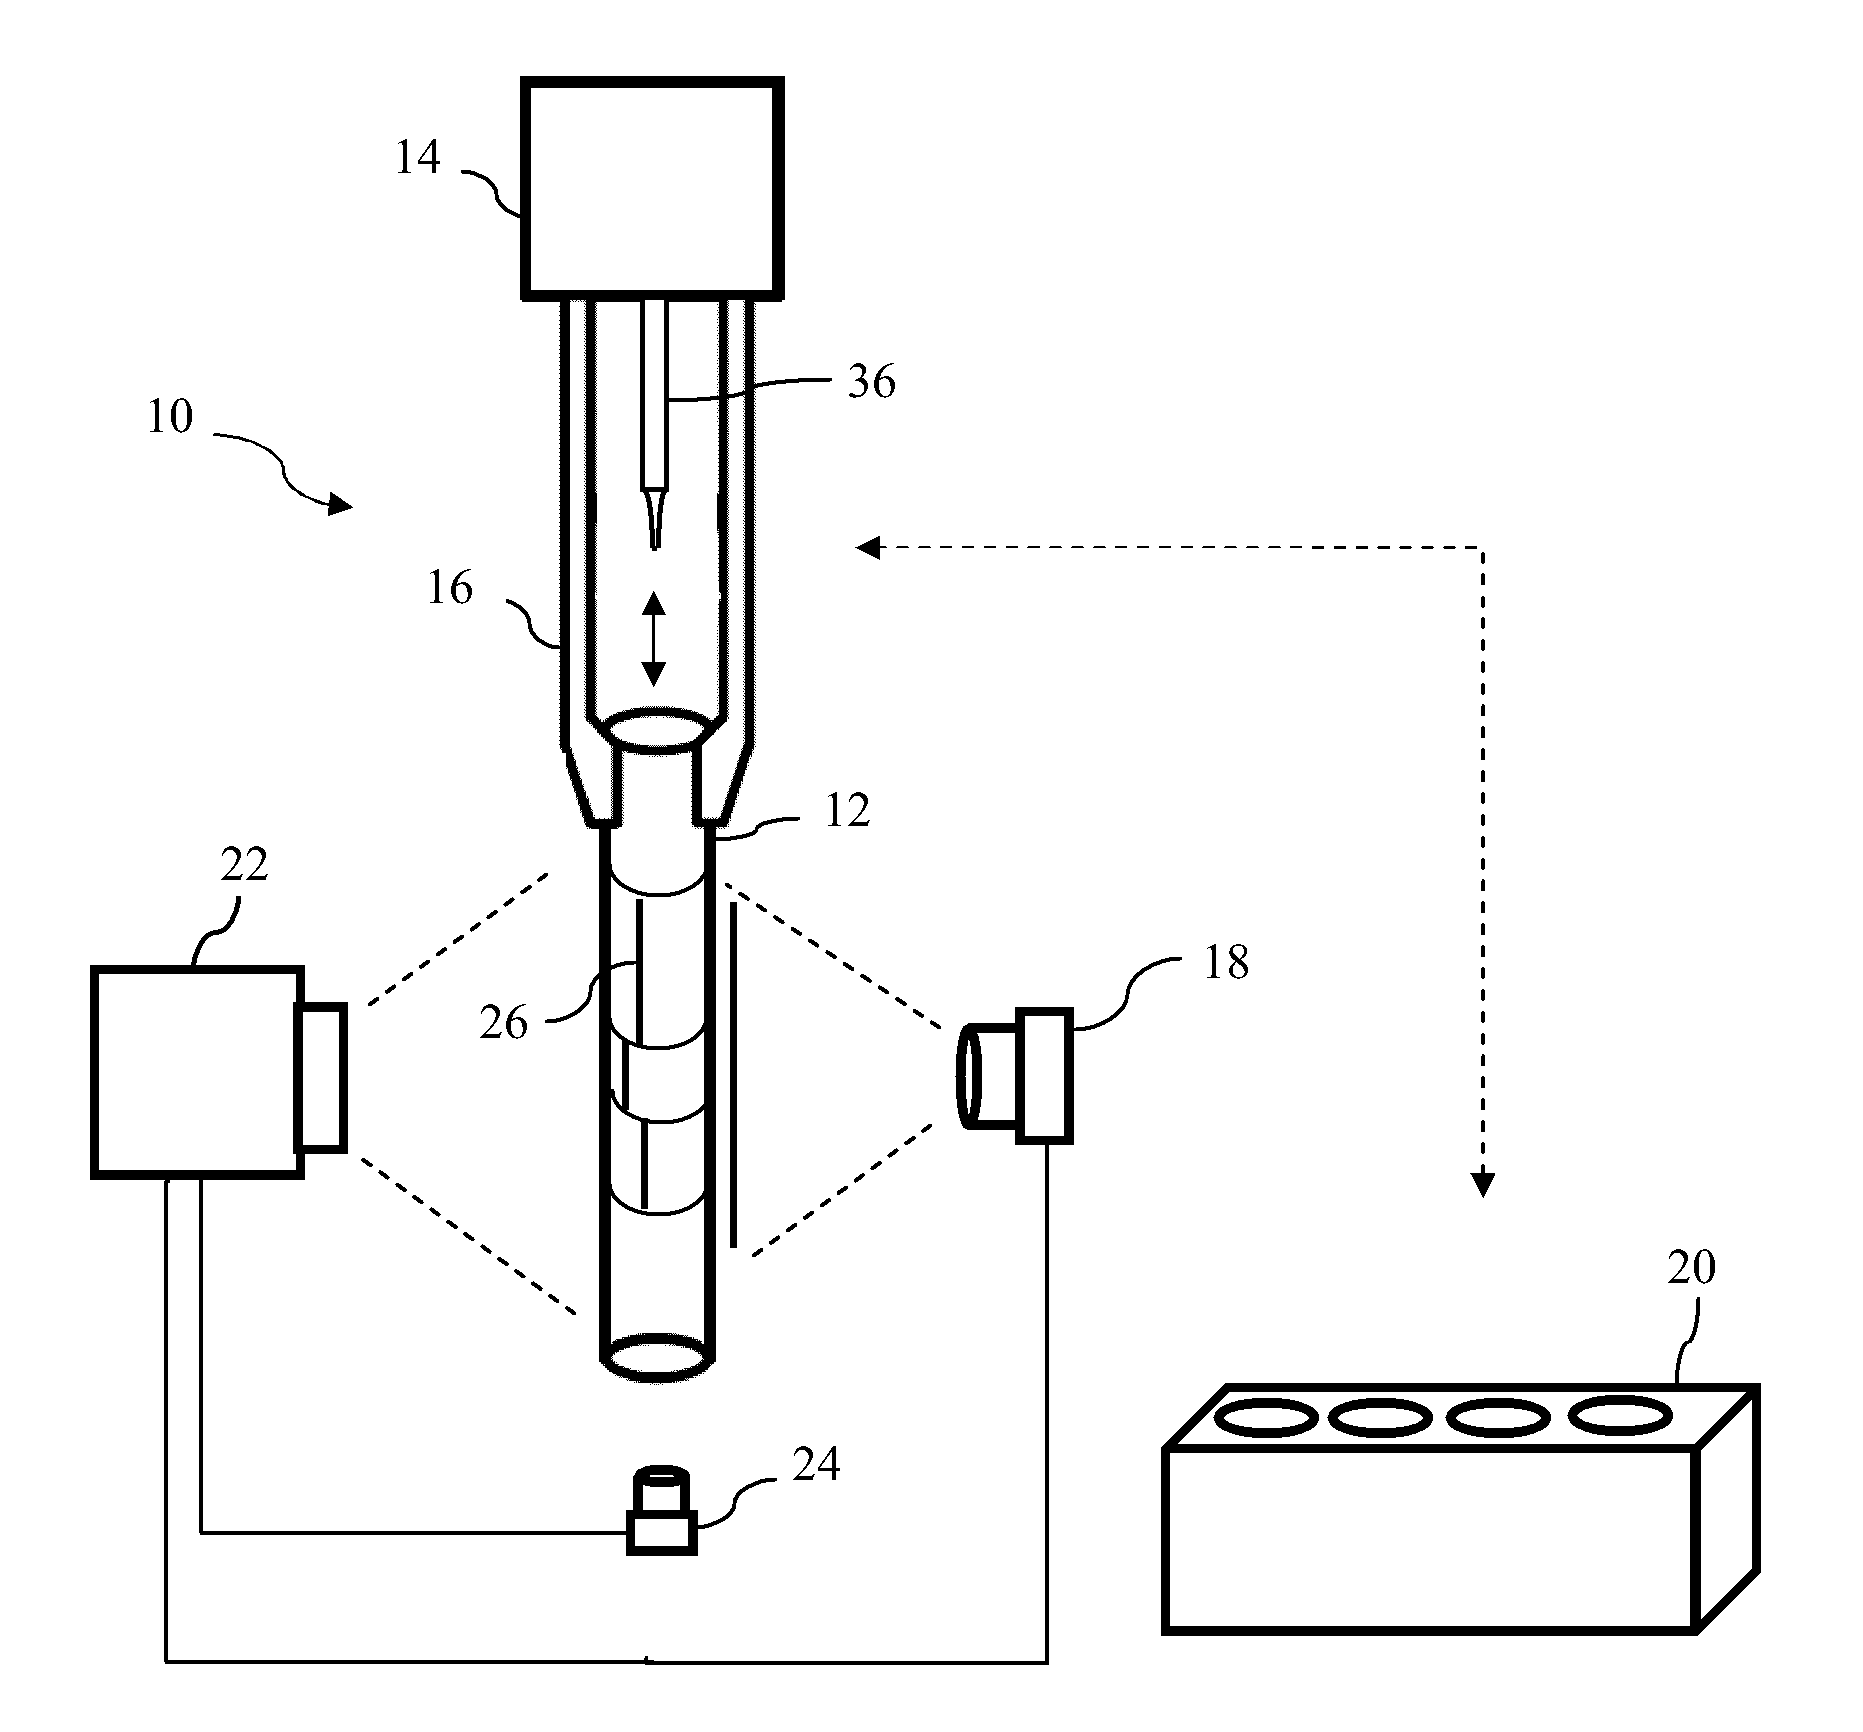 System and method for detection of liquid level in a vessel